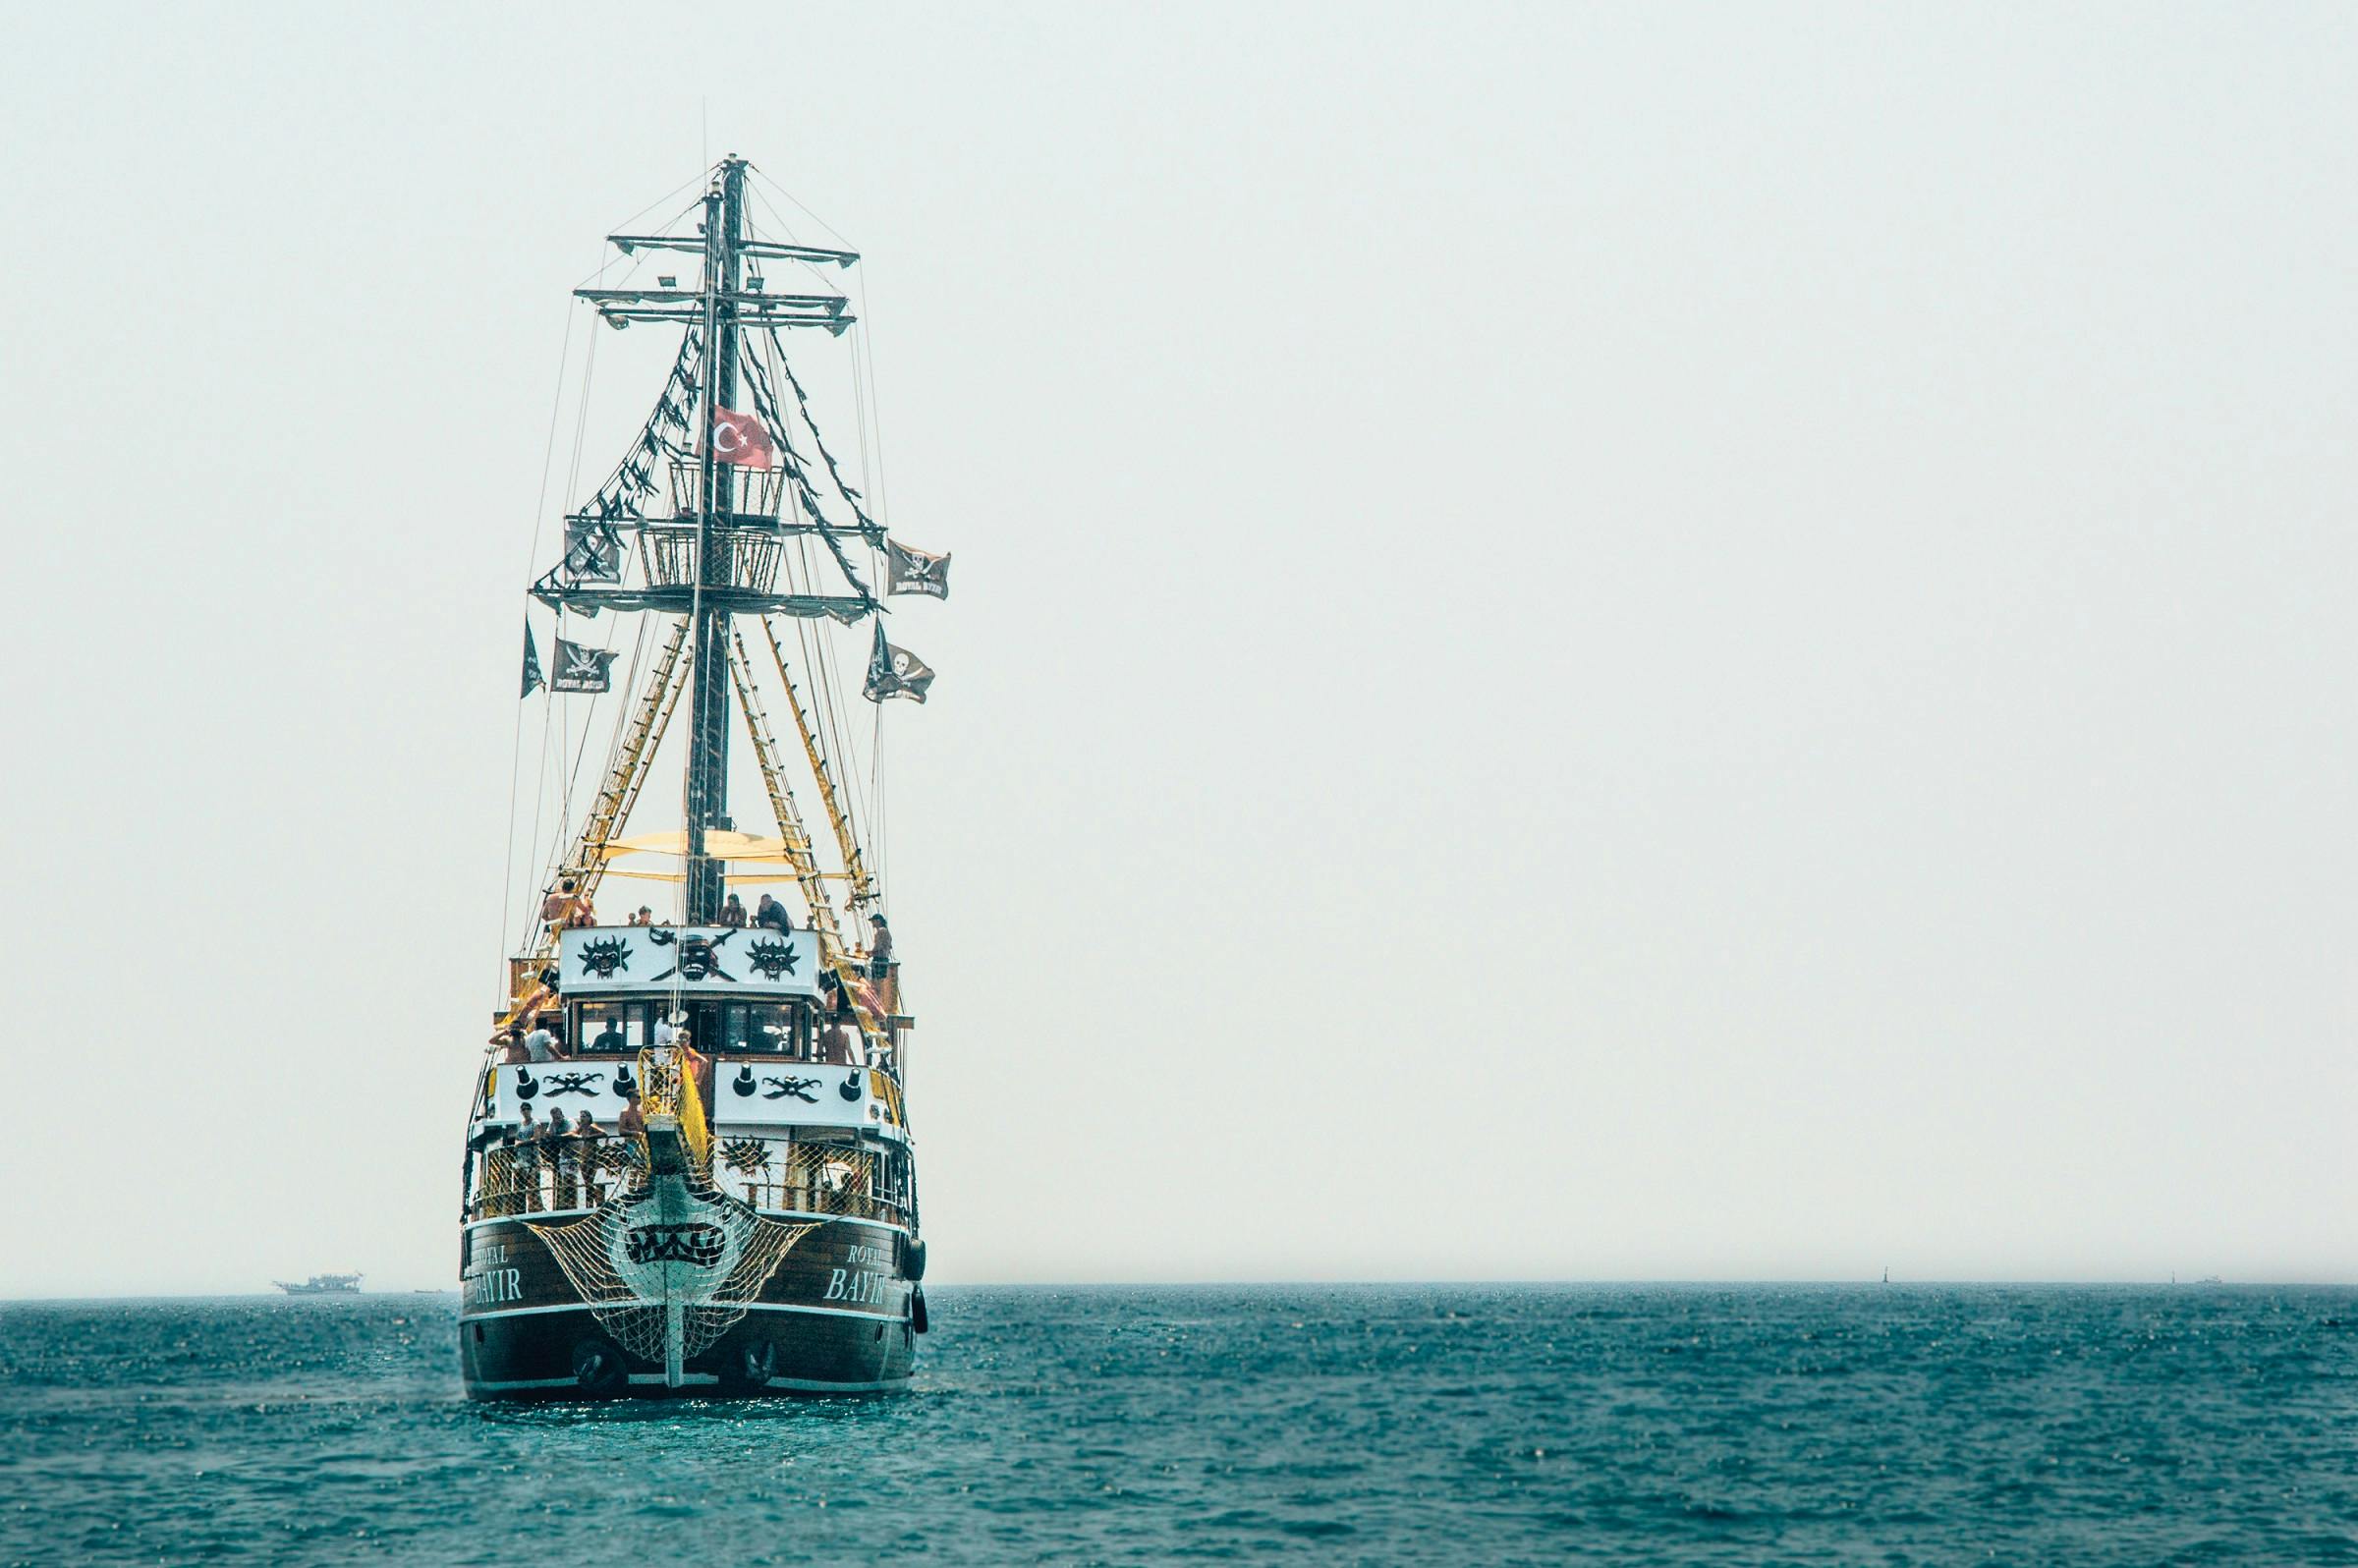 Product image for Pirate Boat Trip with Free Transfer from Antalya